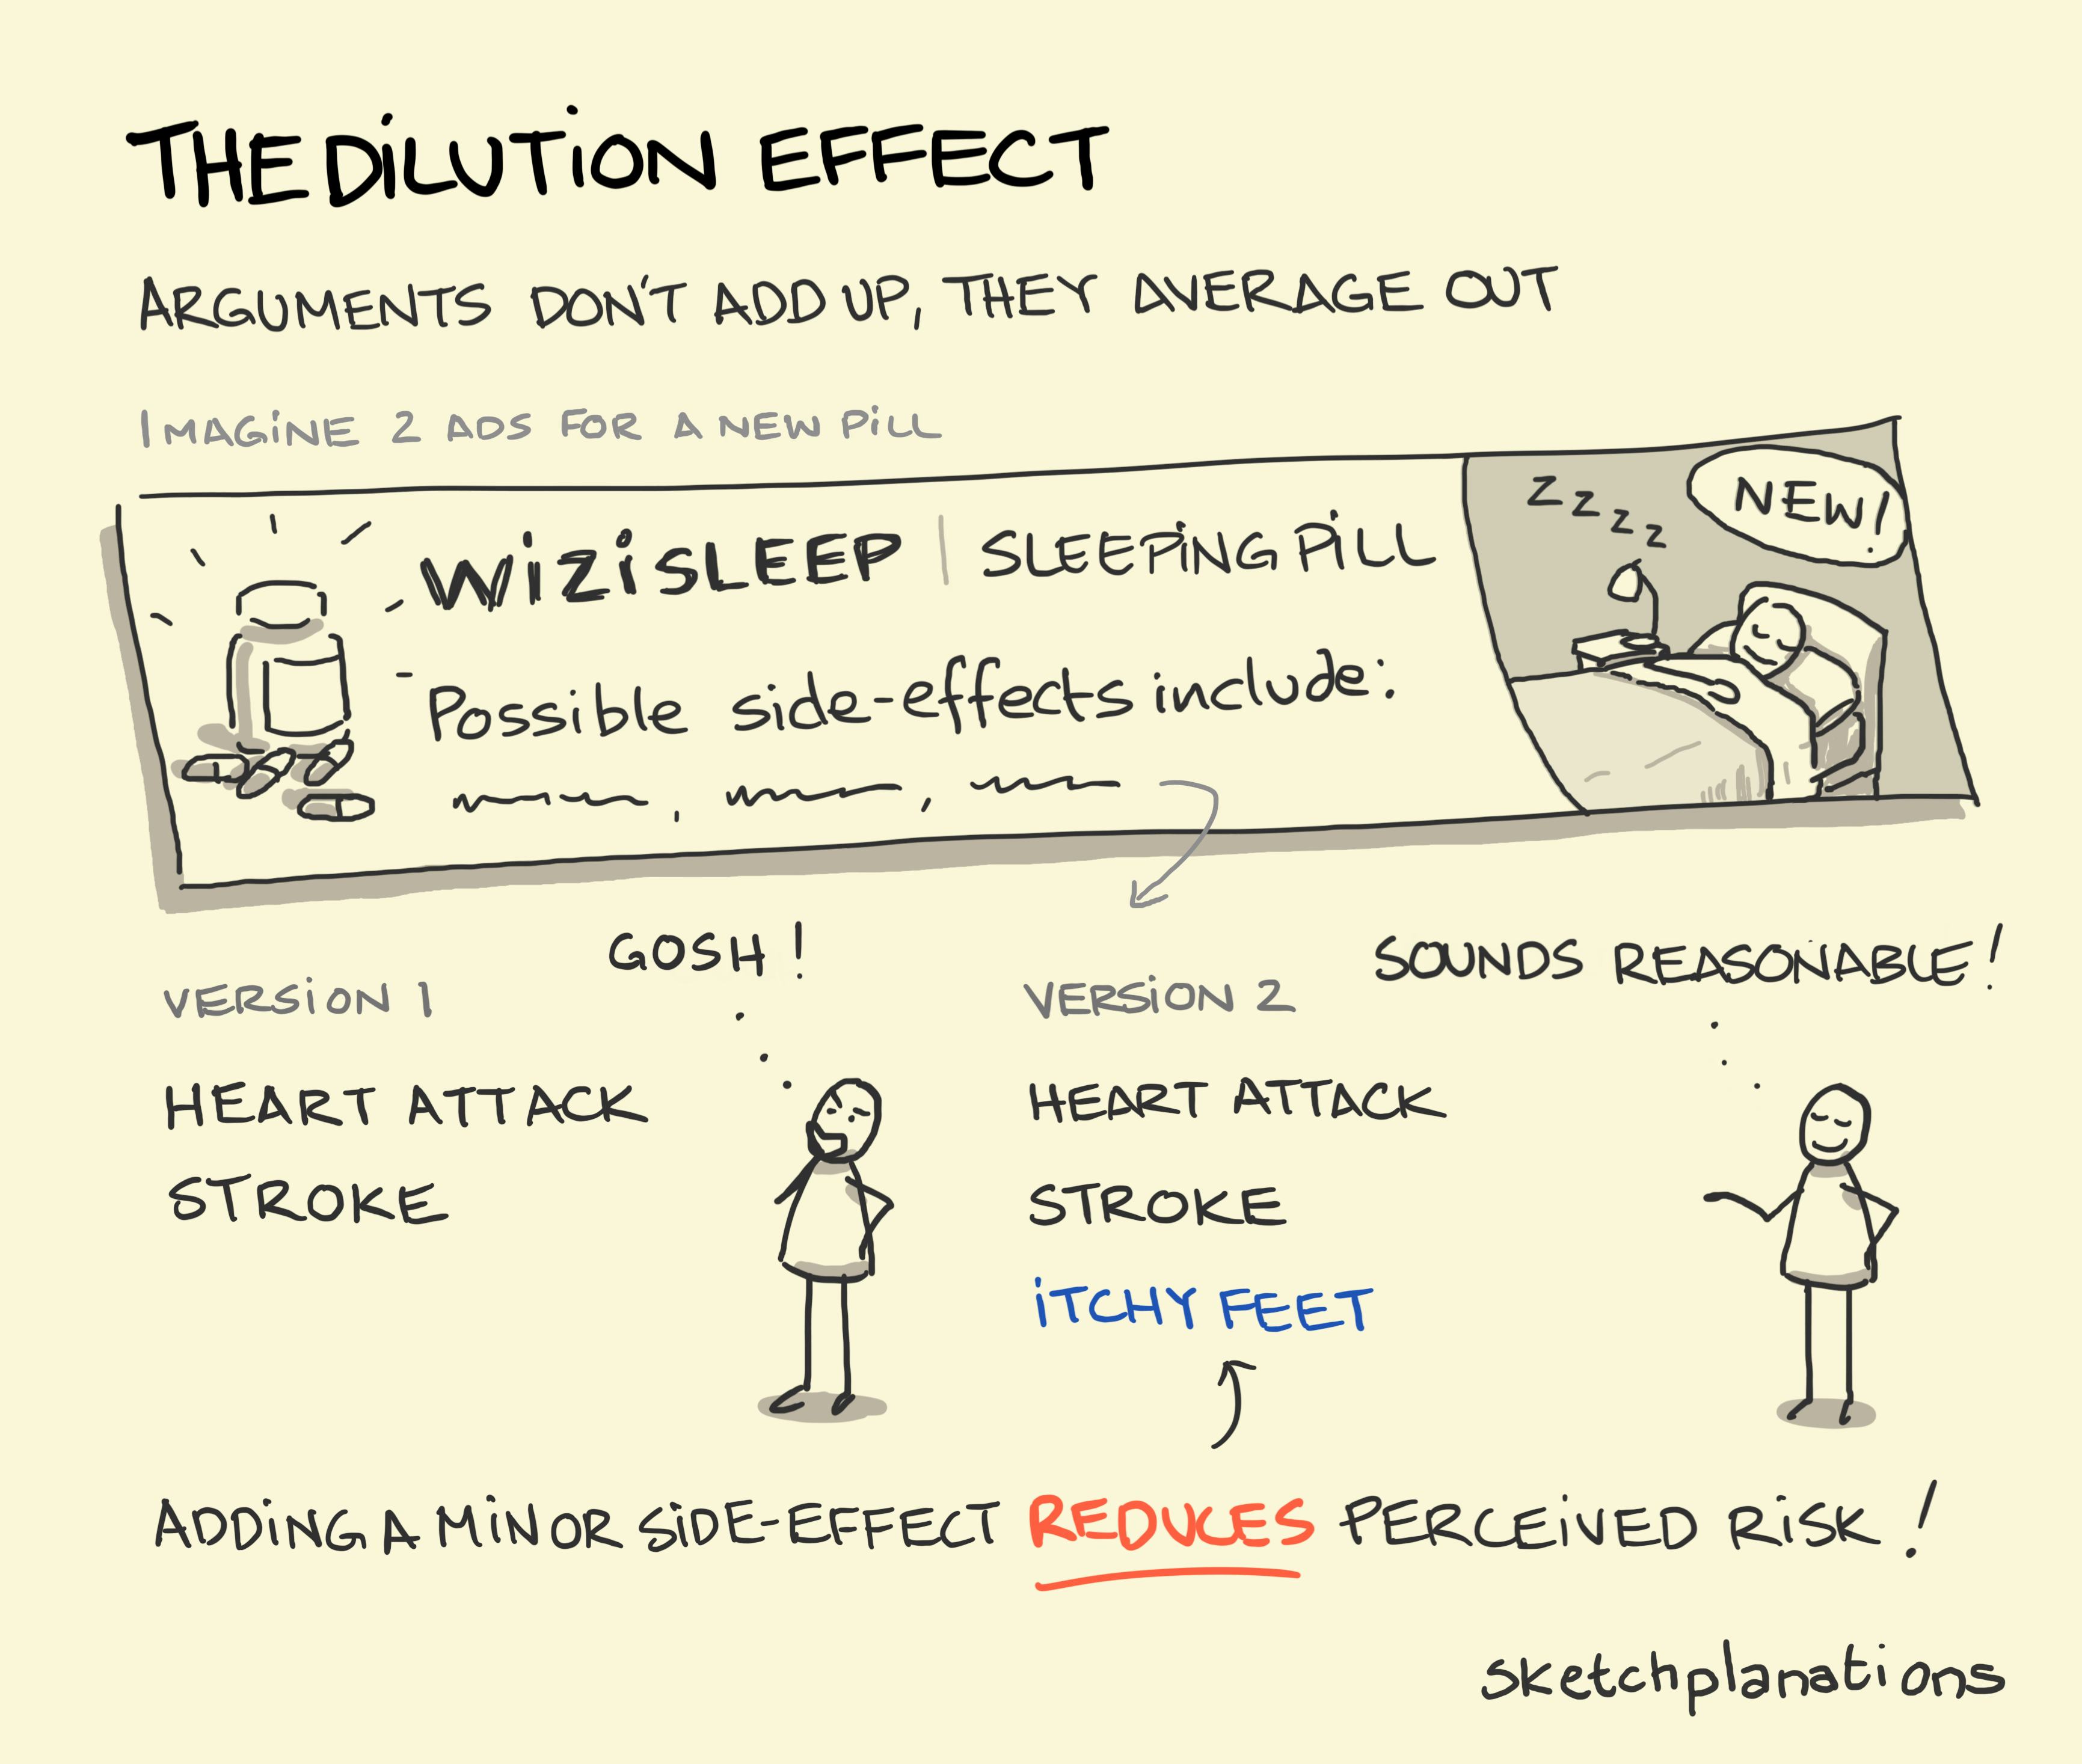 The dilution effect illustration: showing how adding a side effect of 'itchy feet' to sleeping pills reduces perceived risk of the other side-effects of heart attack and stroke!